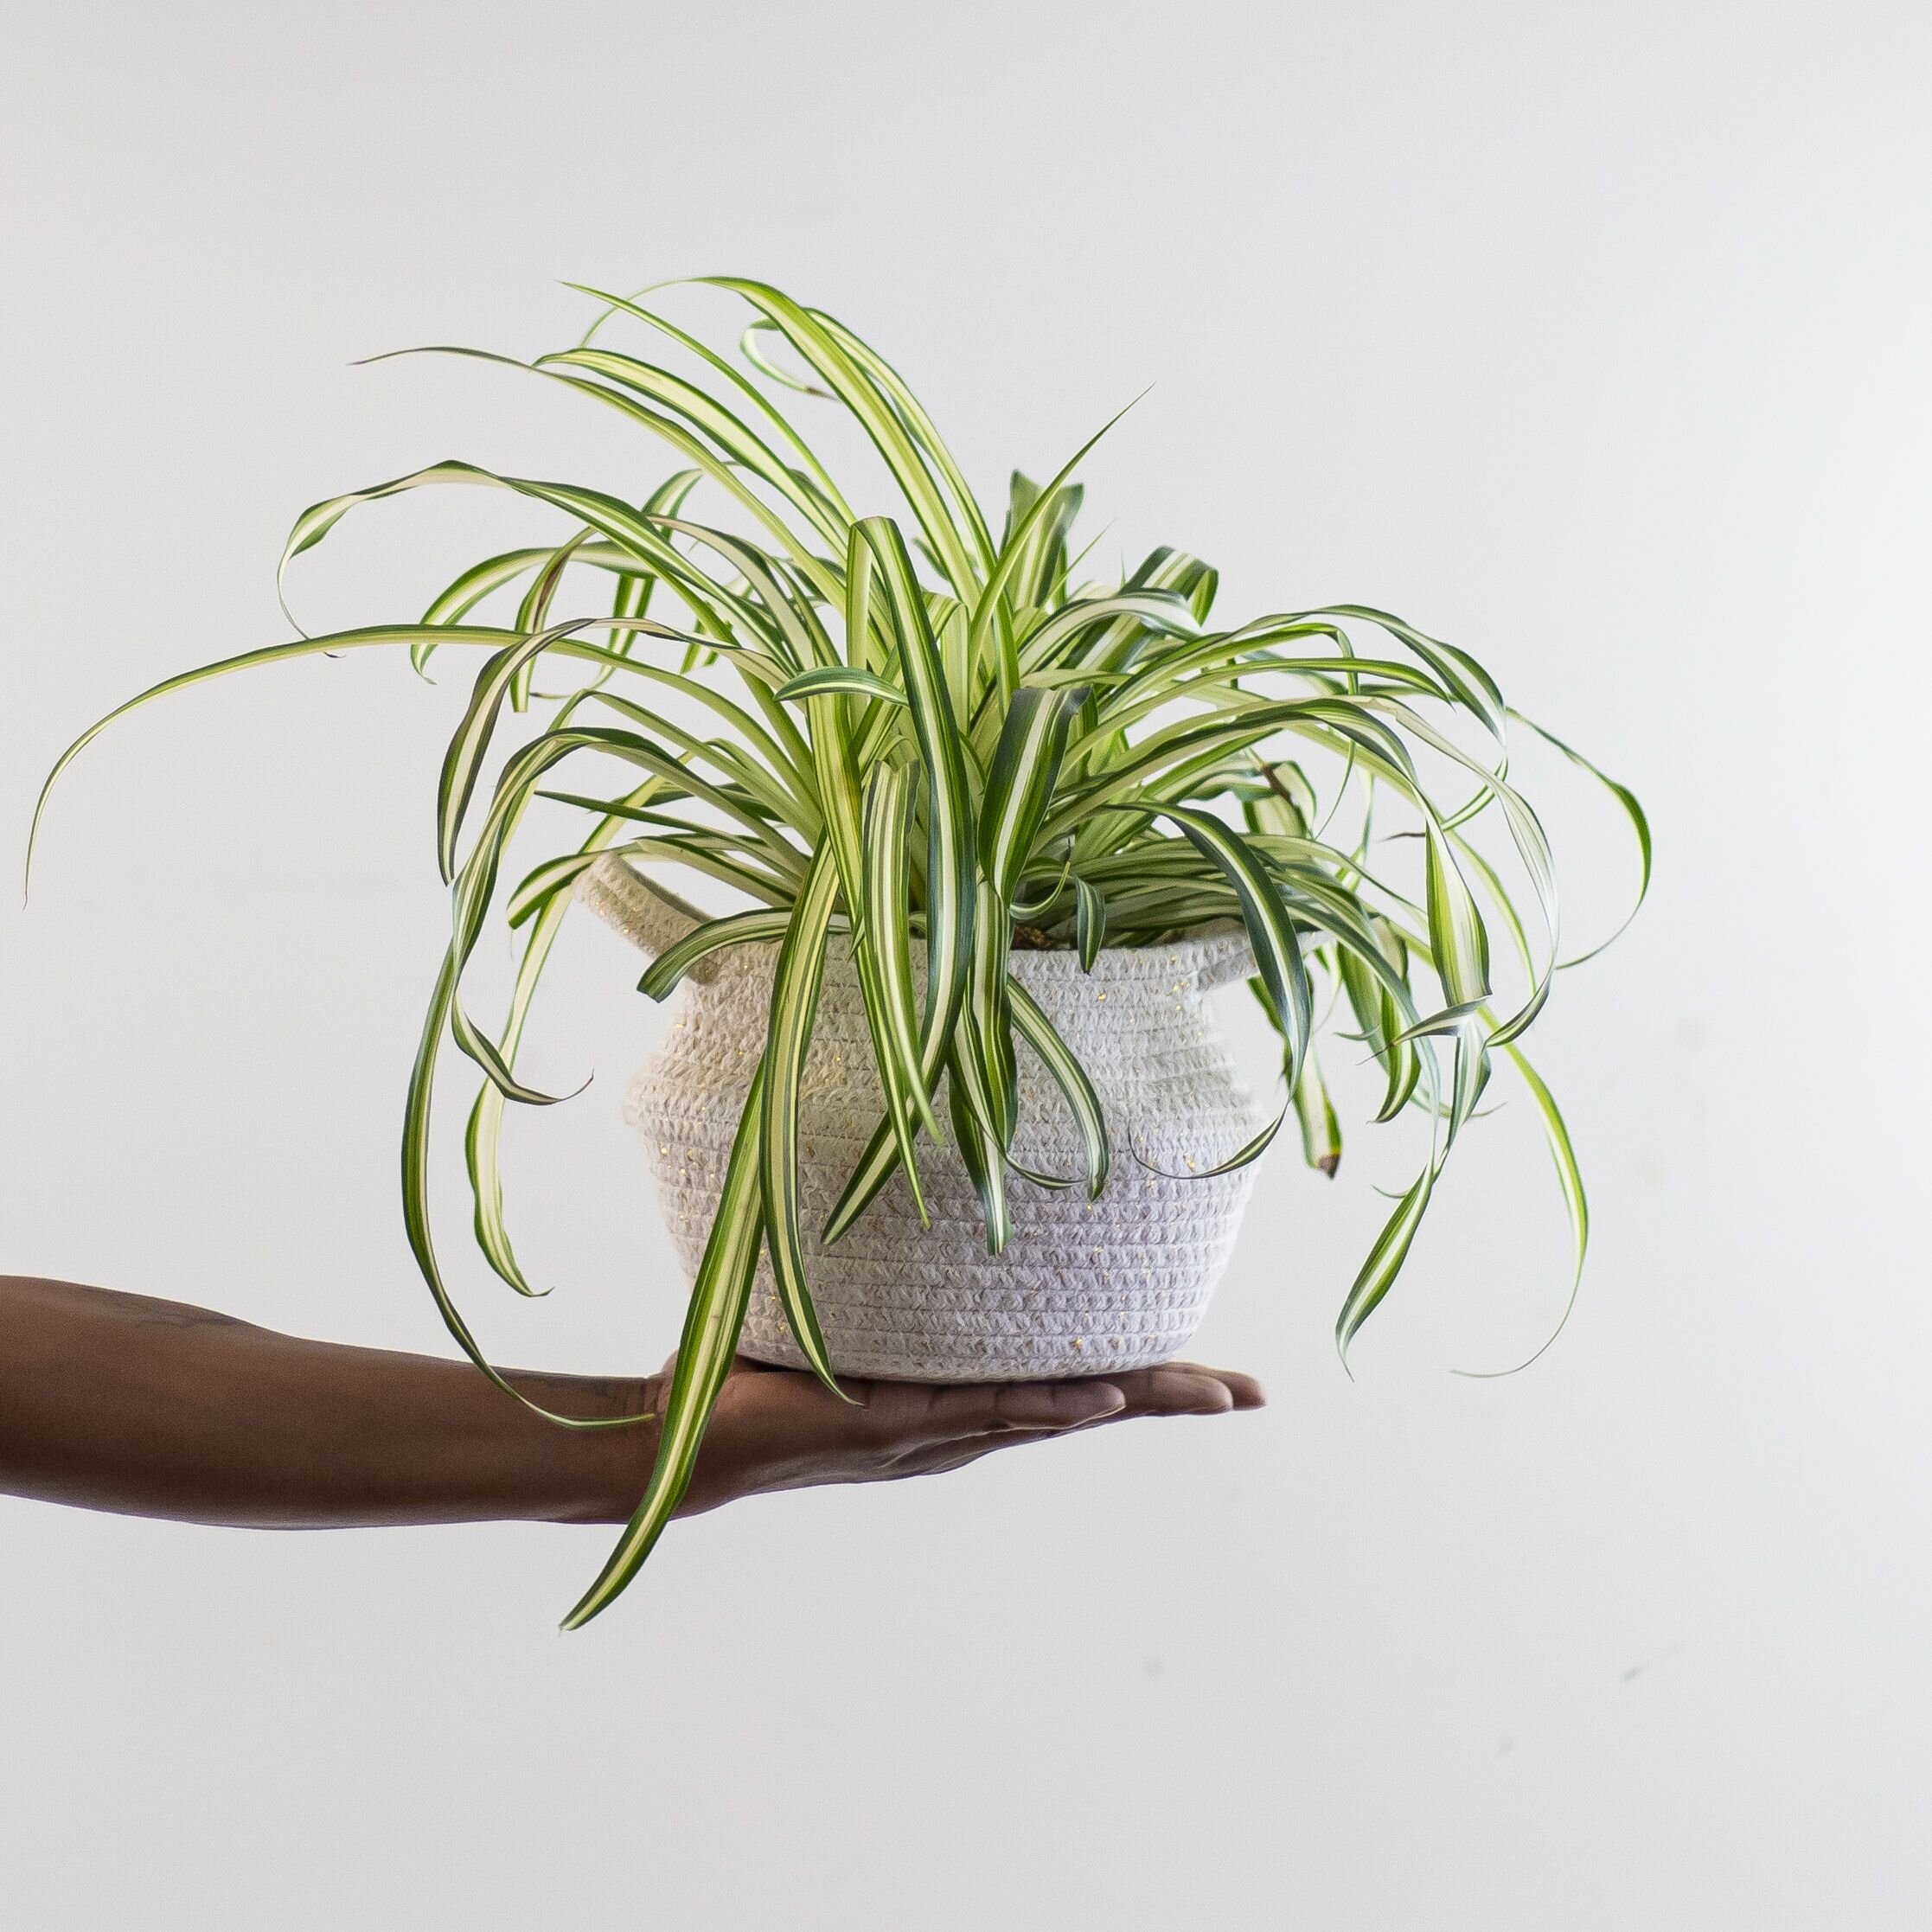 A green spider plant in a woven fabric planter being held up by hand in front of a white background